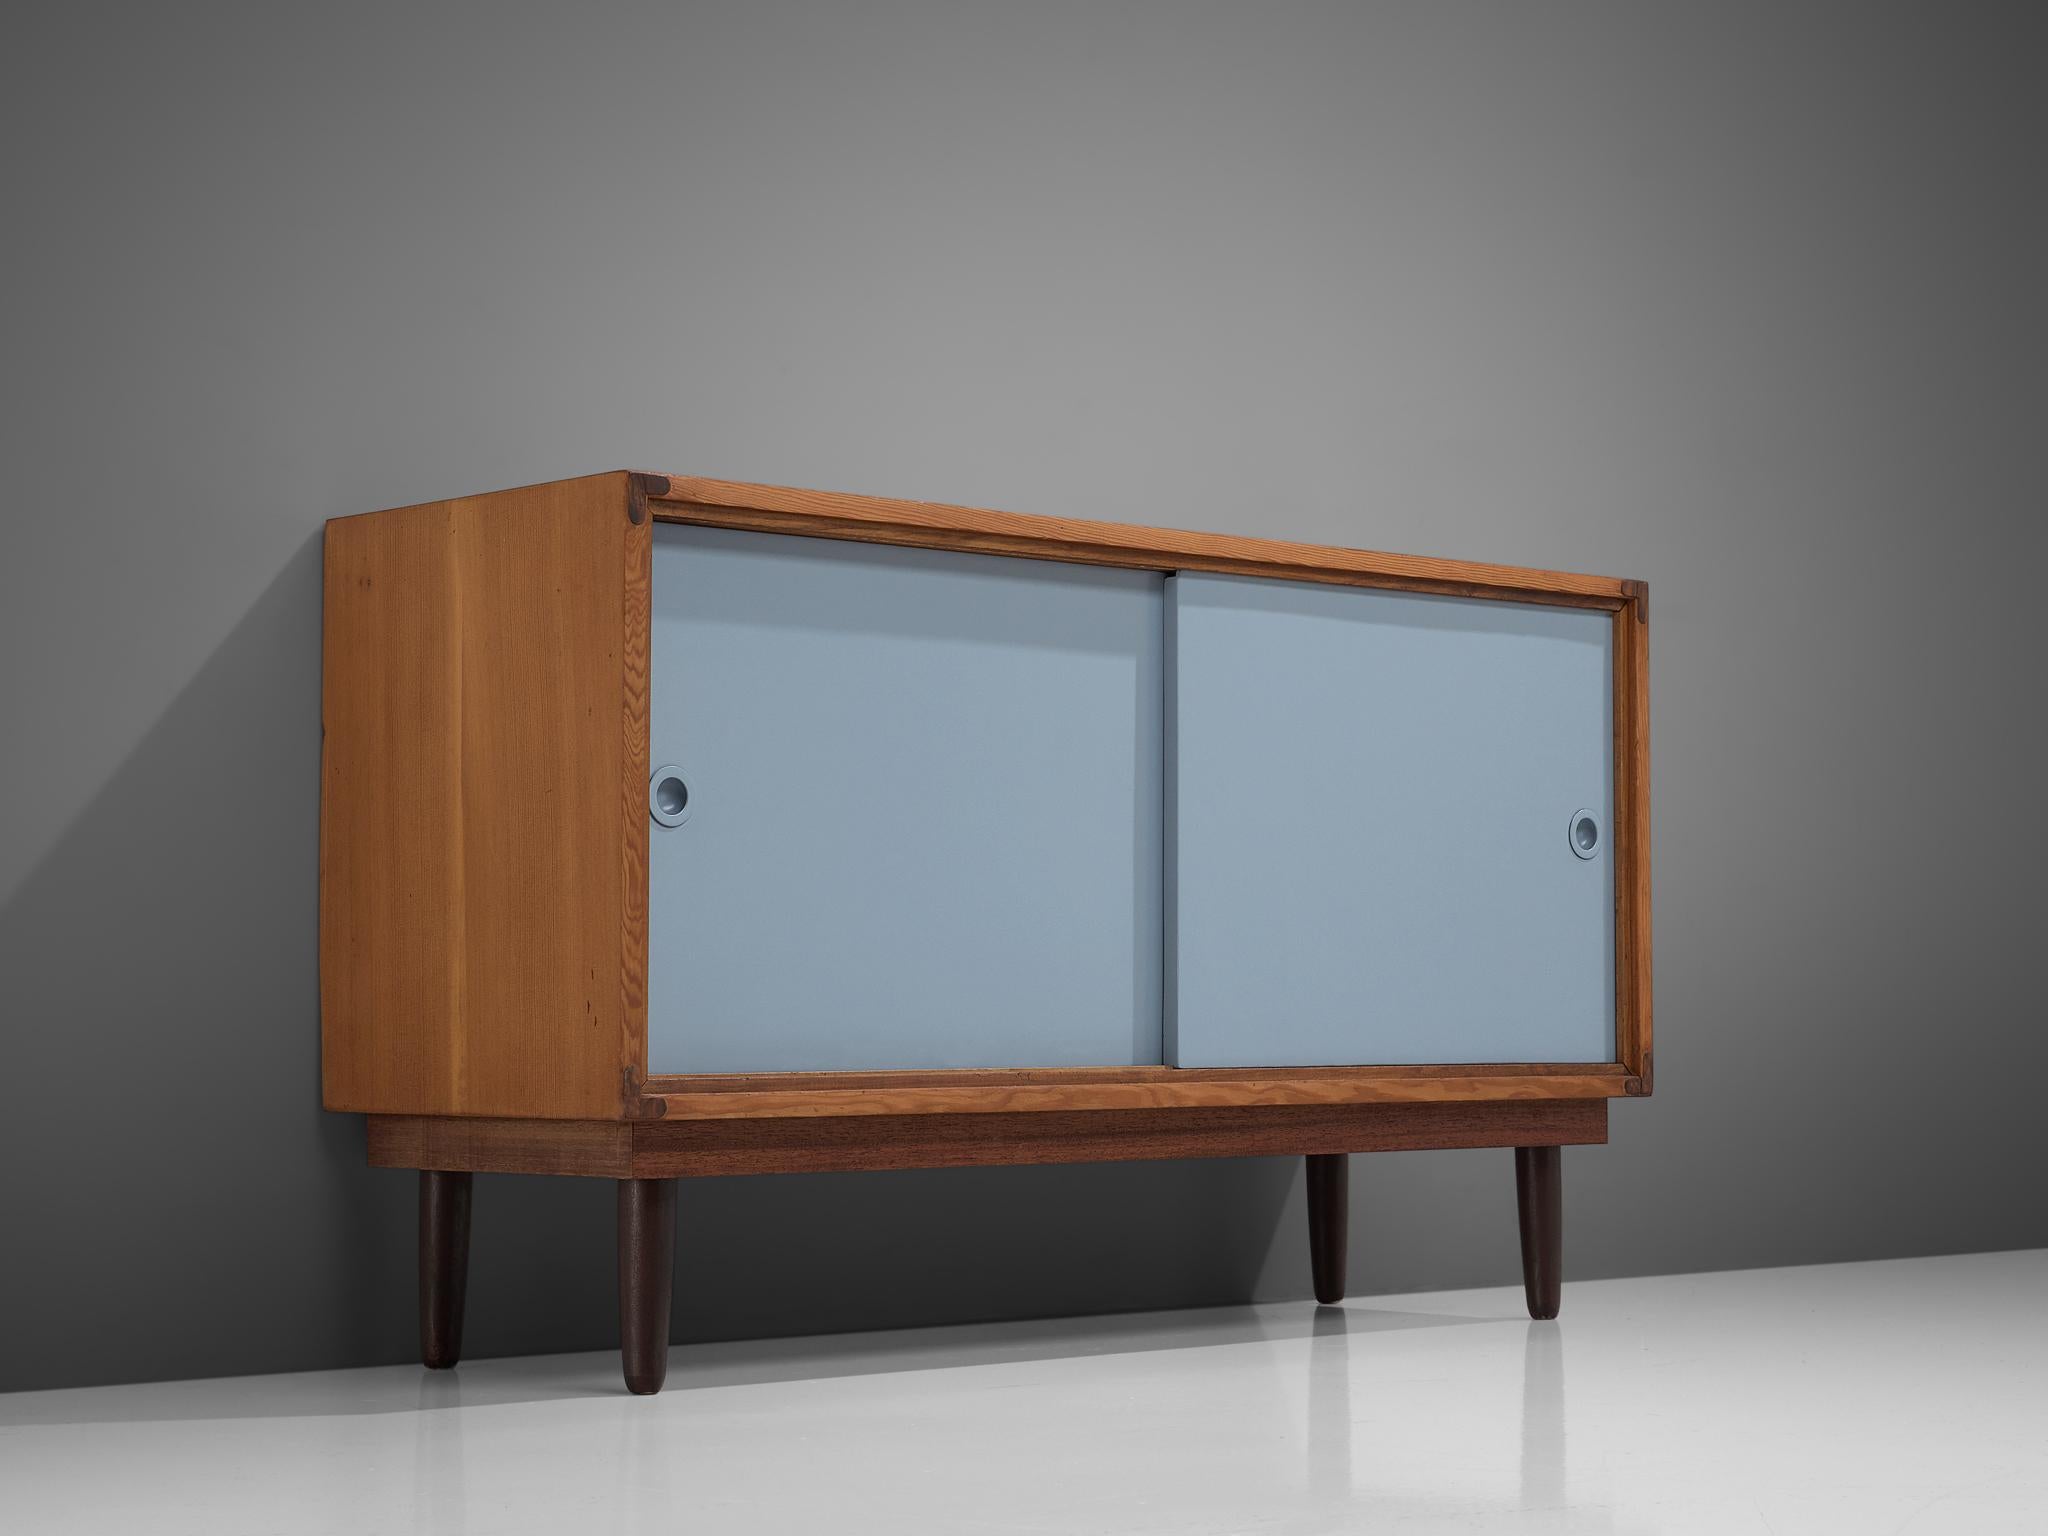 Cabinet, pine, Denmark, 1950s

This cabinet is an elegant and well-proportioned piece within a simplistic construction that allows it to fit seamlessly into any interior. The slightly tapered round legs lift the rectangular shaped corpus up,